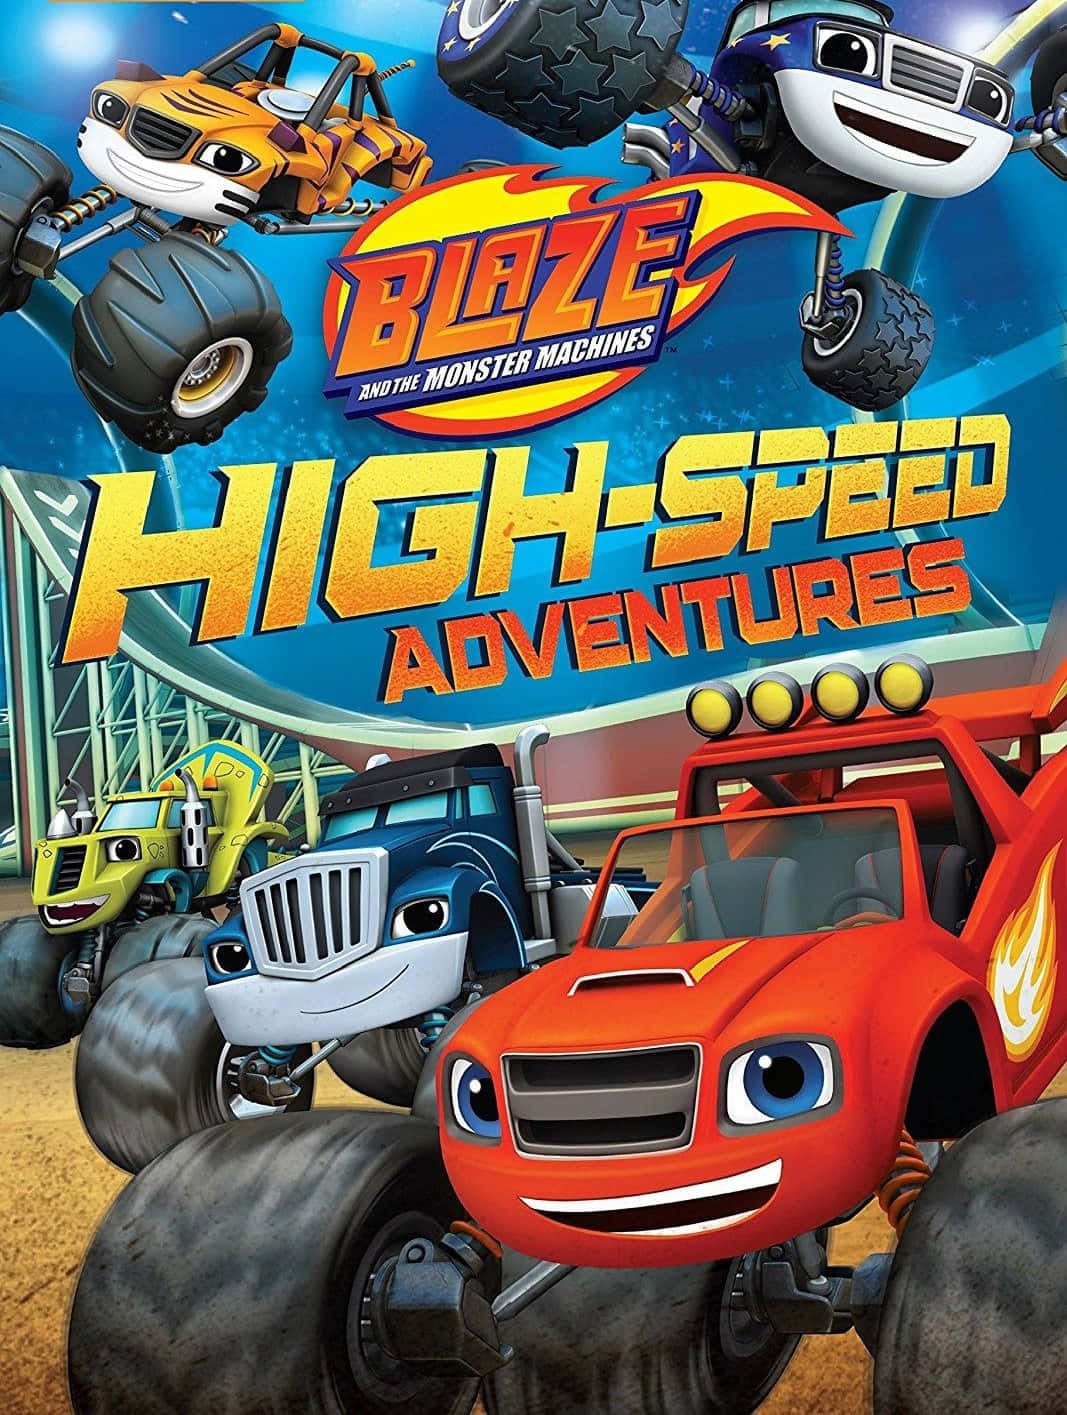 A Poster For Blaze High Speed Adventures